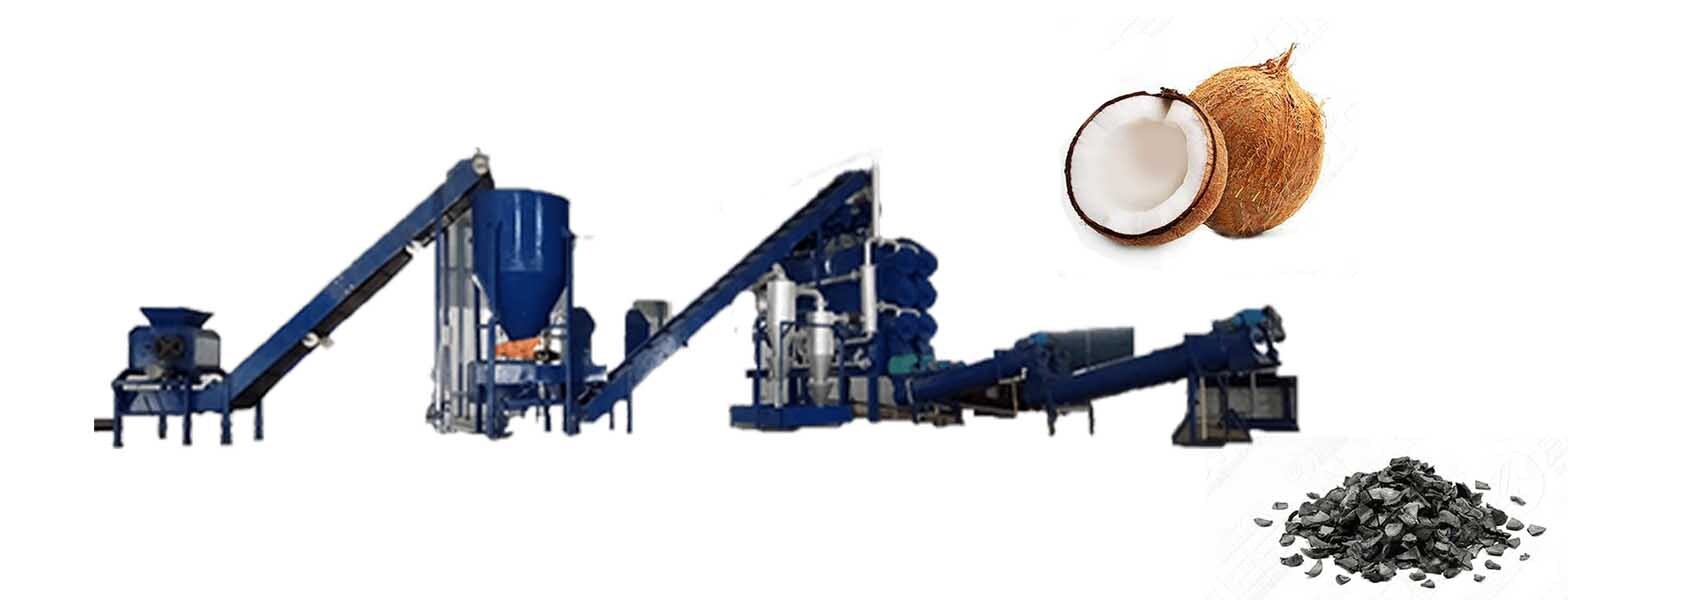 shell charcoal plant machinery manufacturers in india